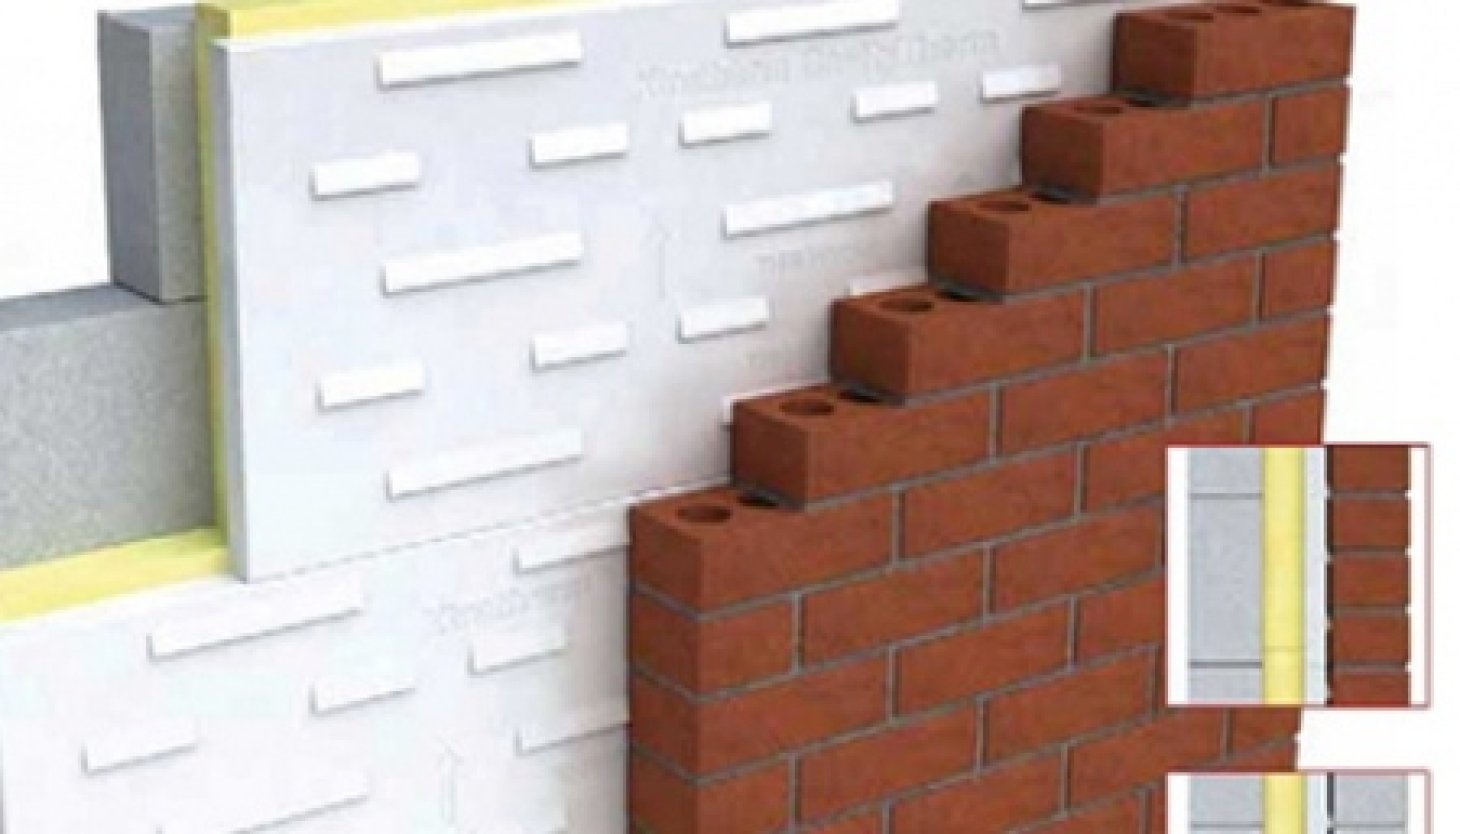 The end of the road for cavity walls?